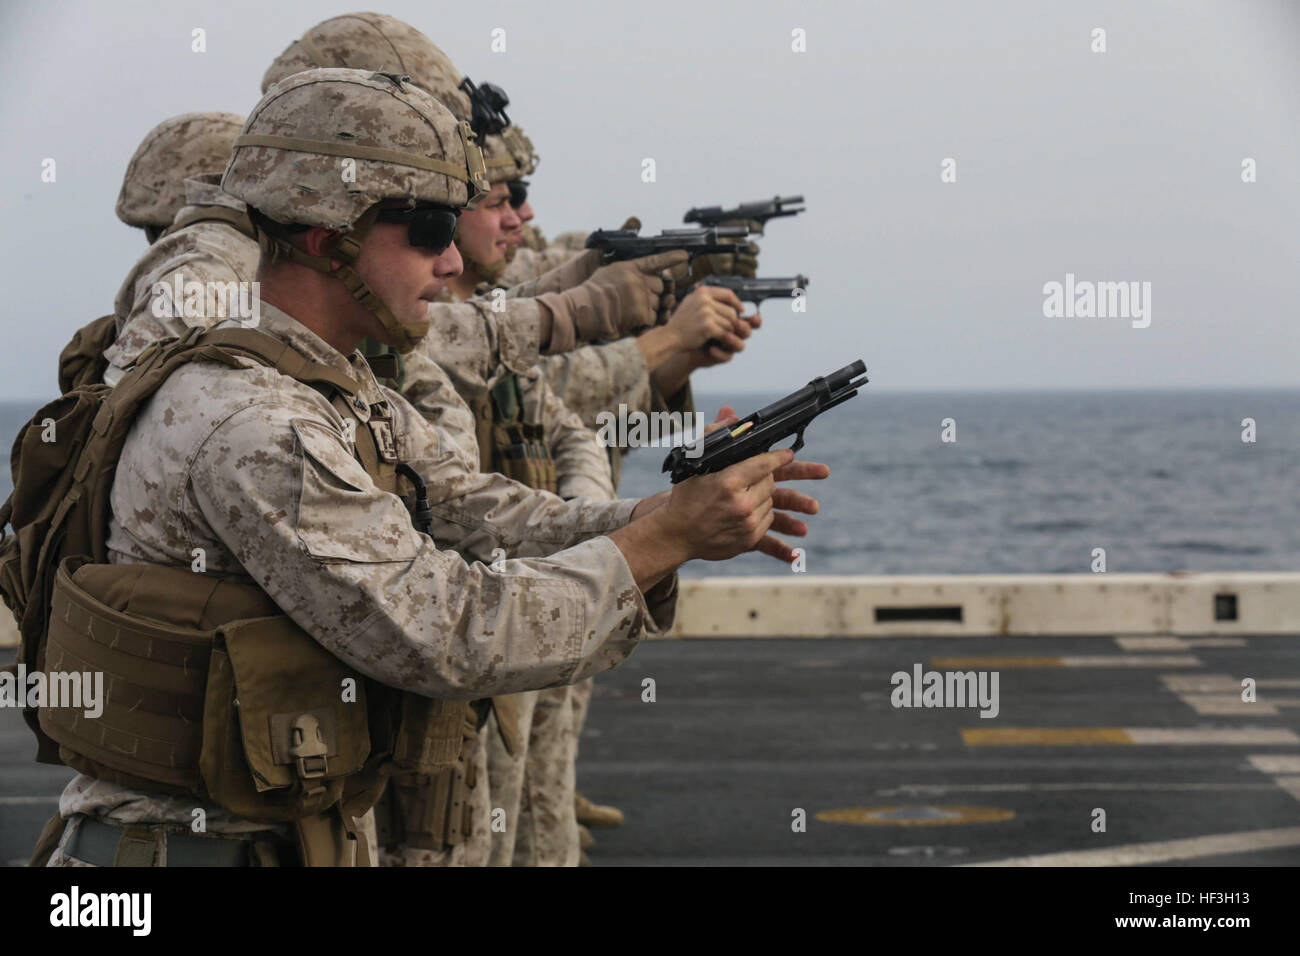 GULF OF ADEN (July 18, 2015) U.S. Marine Lance Cpl. Zachary Cox chambers a round into his M9 Beretta pistol during a weapons-switching drill aboard the amphibious transport dock ship USS Anchorage (LPD 23). Cox is a machine gunner with Battalion Landing Team 3rd Battalion, 1st Marine Regiment, 15th Marine Expeditionary Unit. BLT 3/1 is the ground combat element of the 15th MEU and, embarked aboard the ships of the Essex Amphibious Ready Group, is deployed in support of maritime security operations and theater security cooperation efforts in the U.S. 5th Fleet area of operations. (U.S. Marine C Stock Photo